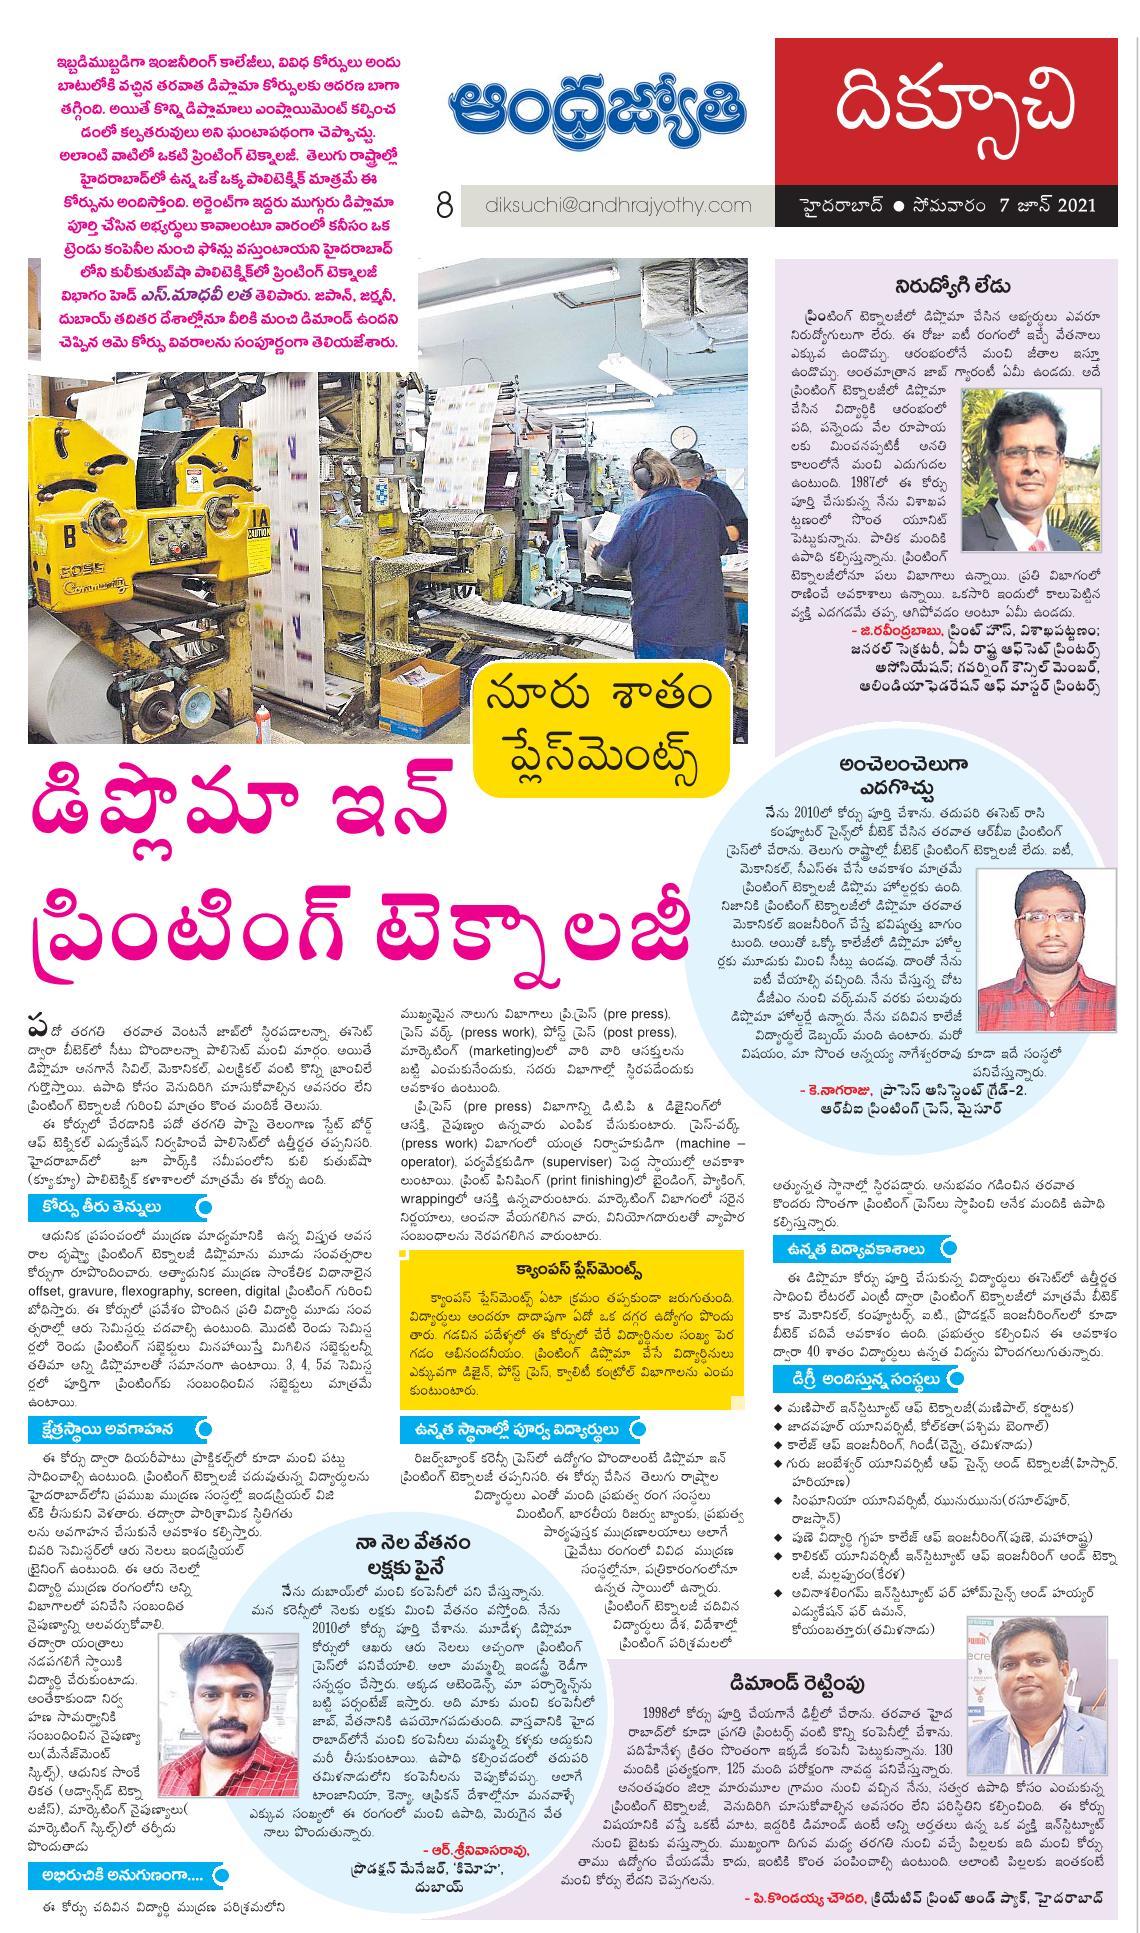 Article on Job Opportunities in Printing Industry
Source: Andhrajyothy (Telugu News Paper)